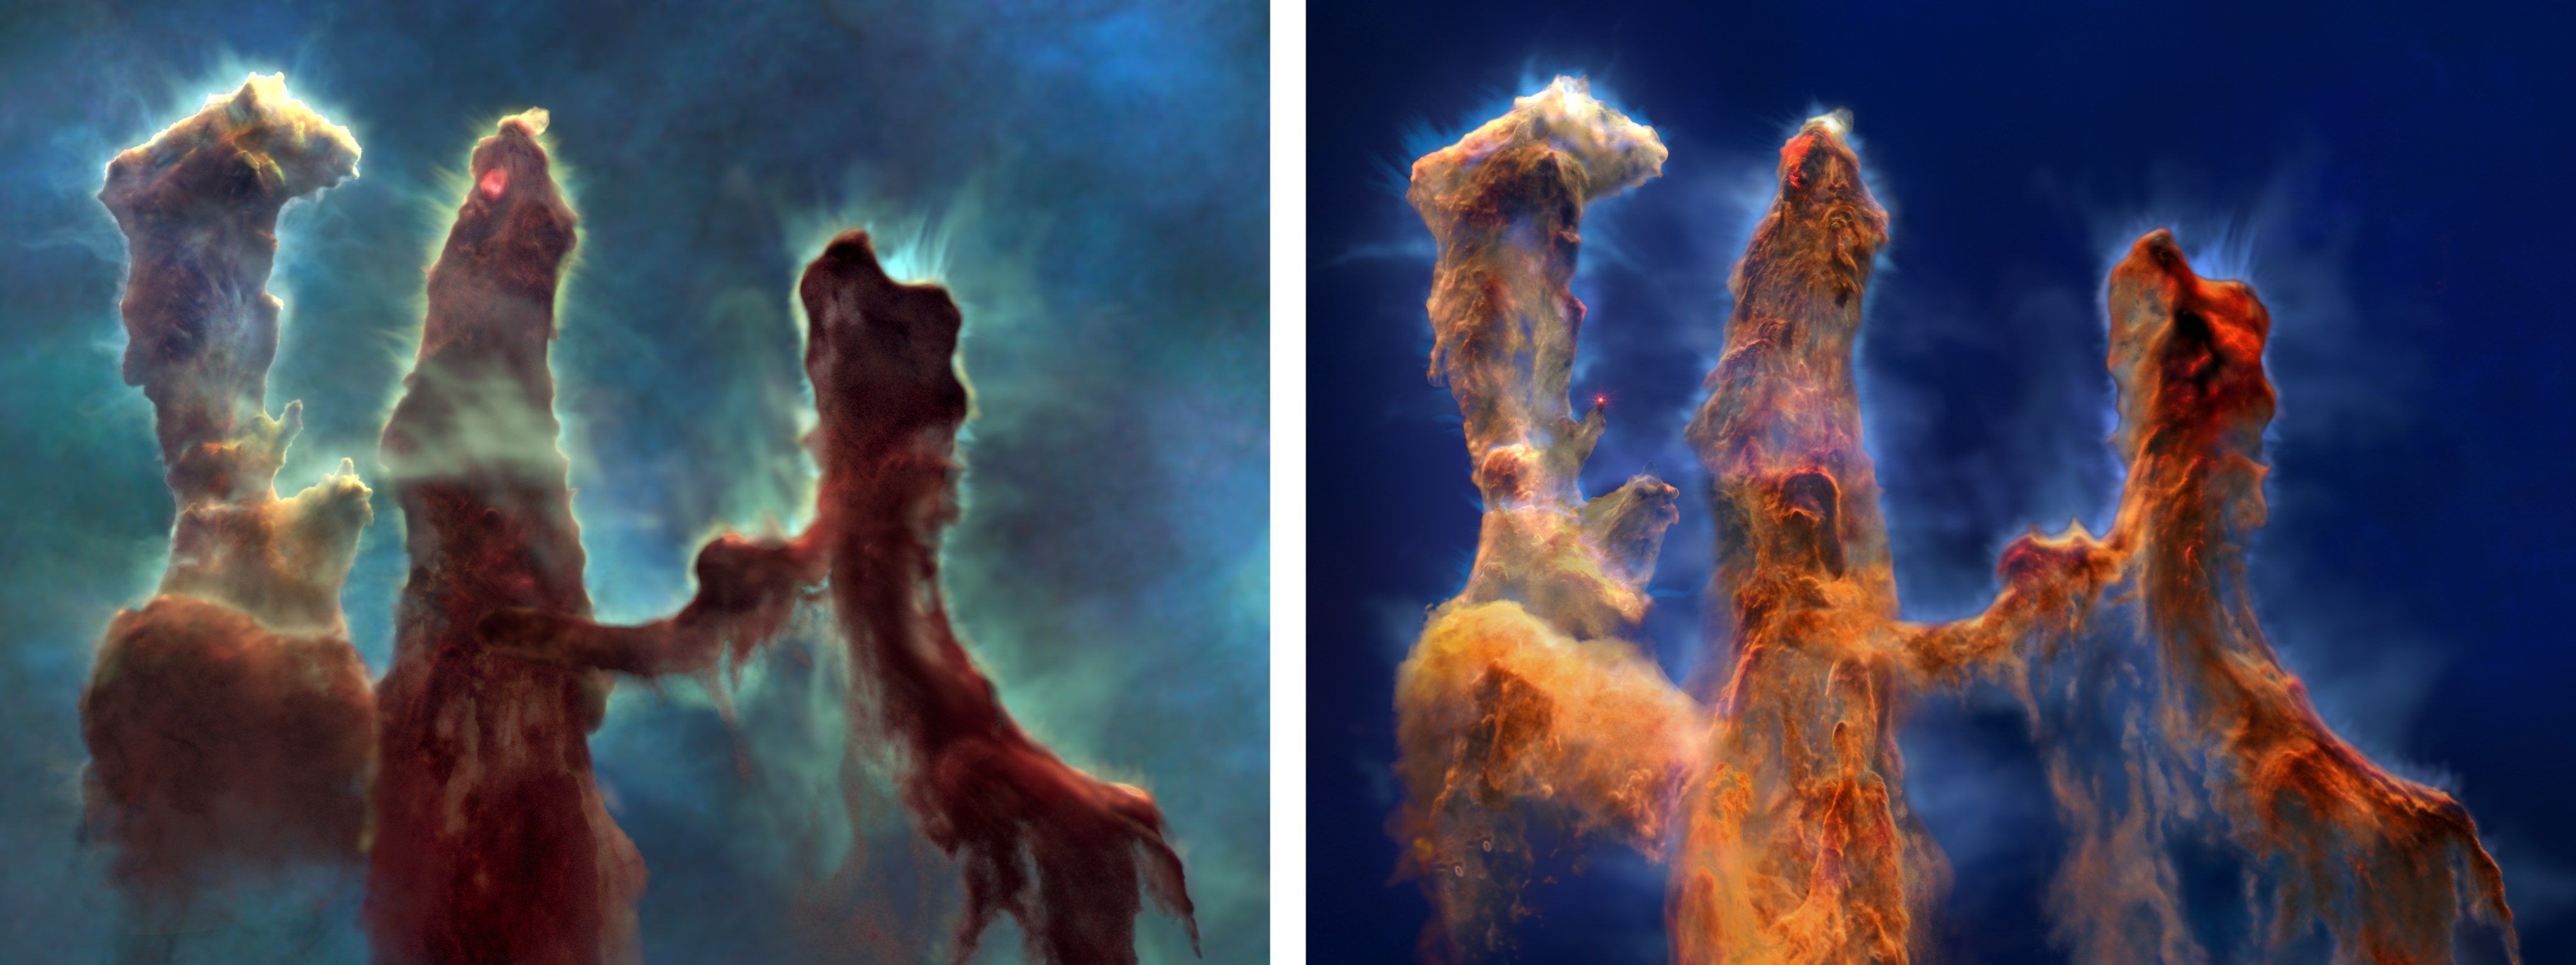 Two visualizations using Hubble and Webb data. The left image is from visible-light data collected by Hubble. The right visualization is from infrared-light data collected by Webb.